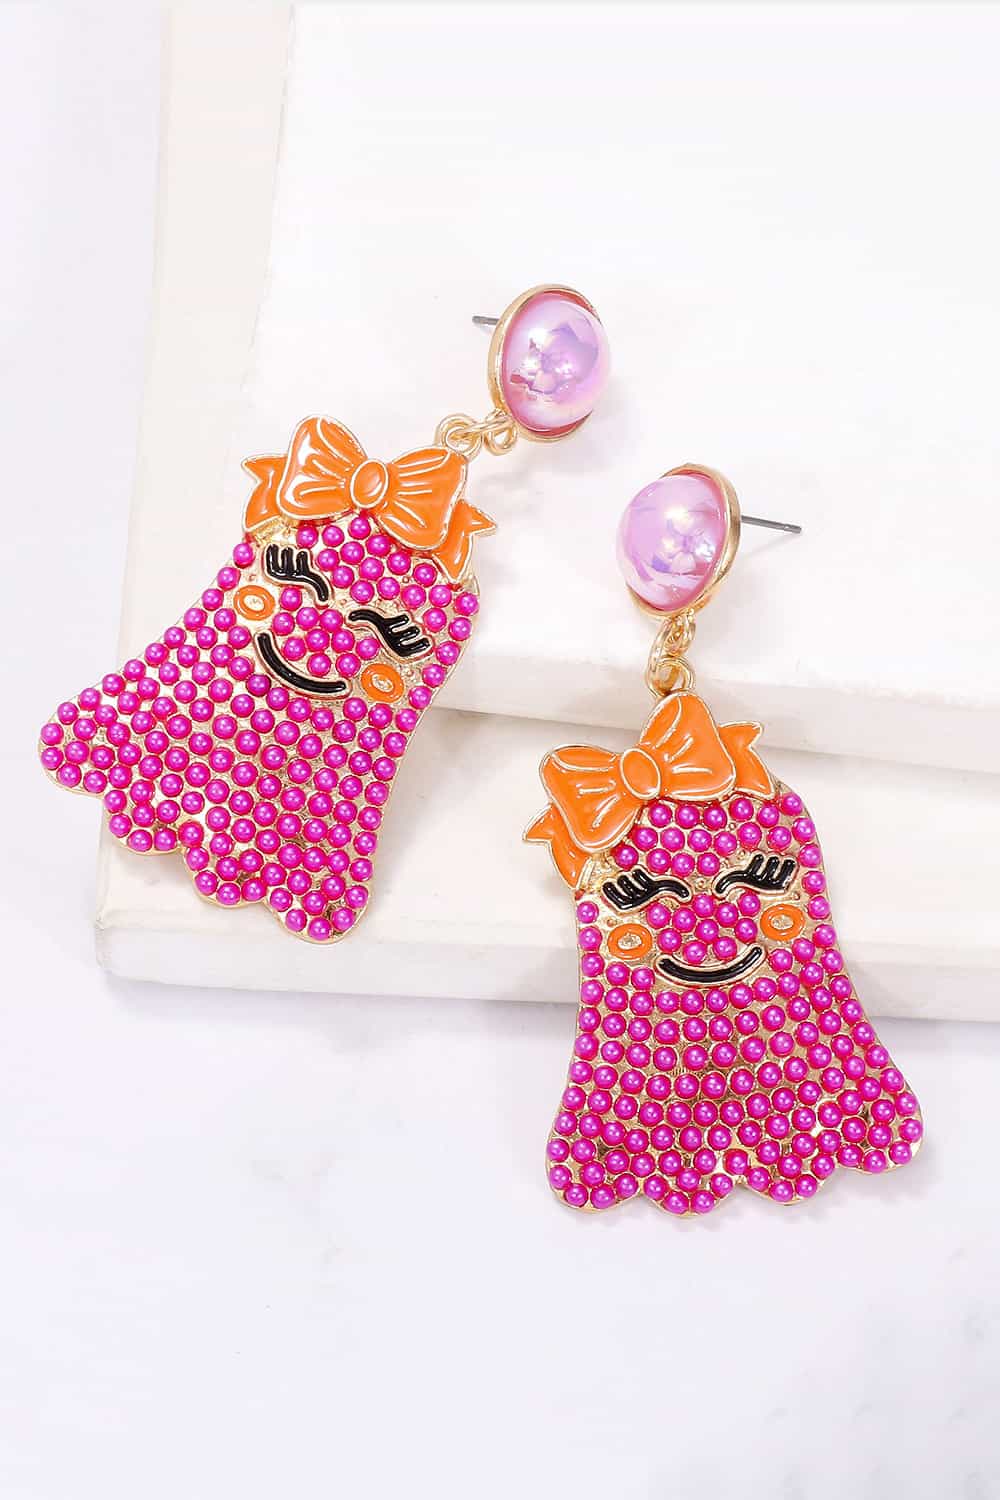 Smiling Ghost Shape Synthetic Pearl Earrings - Kawaii Stop - Charming Earrings, Dangle Earrings, Delightful Design, Dress with a Smile, Exquisite Jewelry, Ghost Shape, J.J.S.P, Joyful Fashion, Modern Style, Must-Have Accessories, Playful Accessories, Ship From Overseas, Shipping Delay 09/29/2023 - 10/04/2023, Spread Positivity, Statement Earrings, Stylish Accessories, Synthetic Pearl Jewelry, Unique Style, Whimsical Fashion, Zinc Alloy